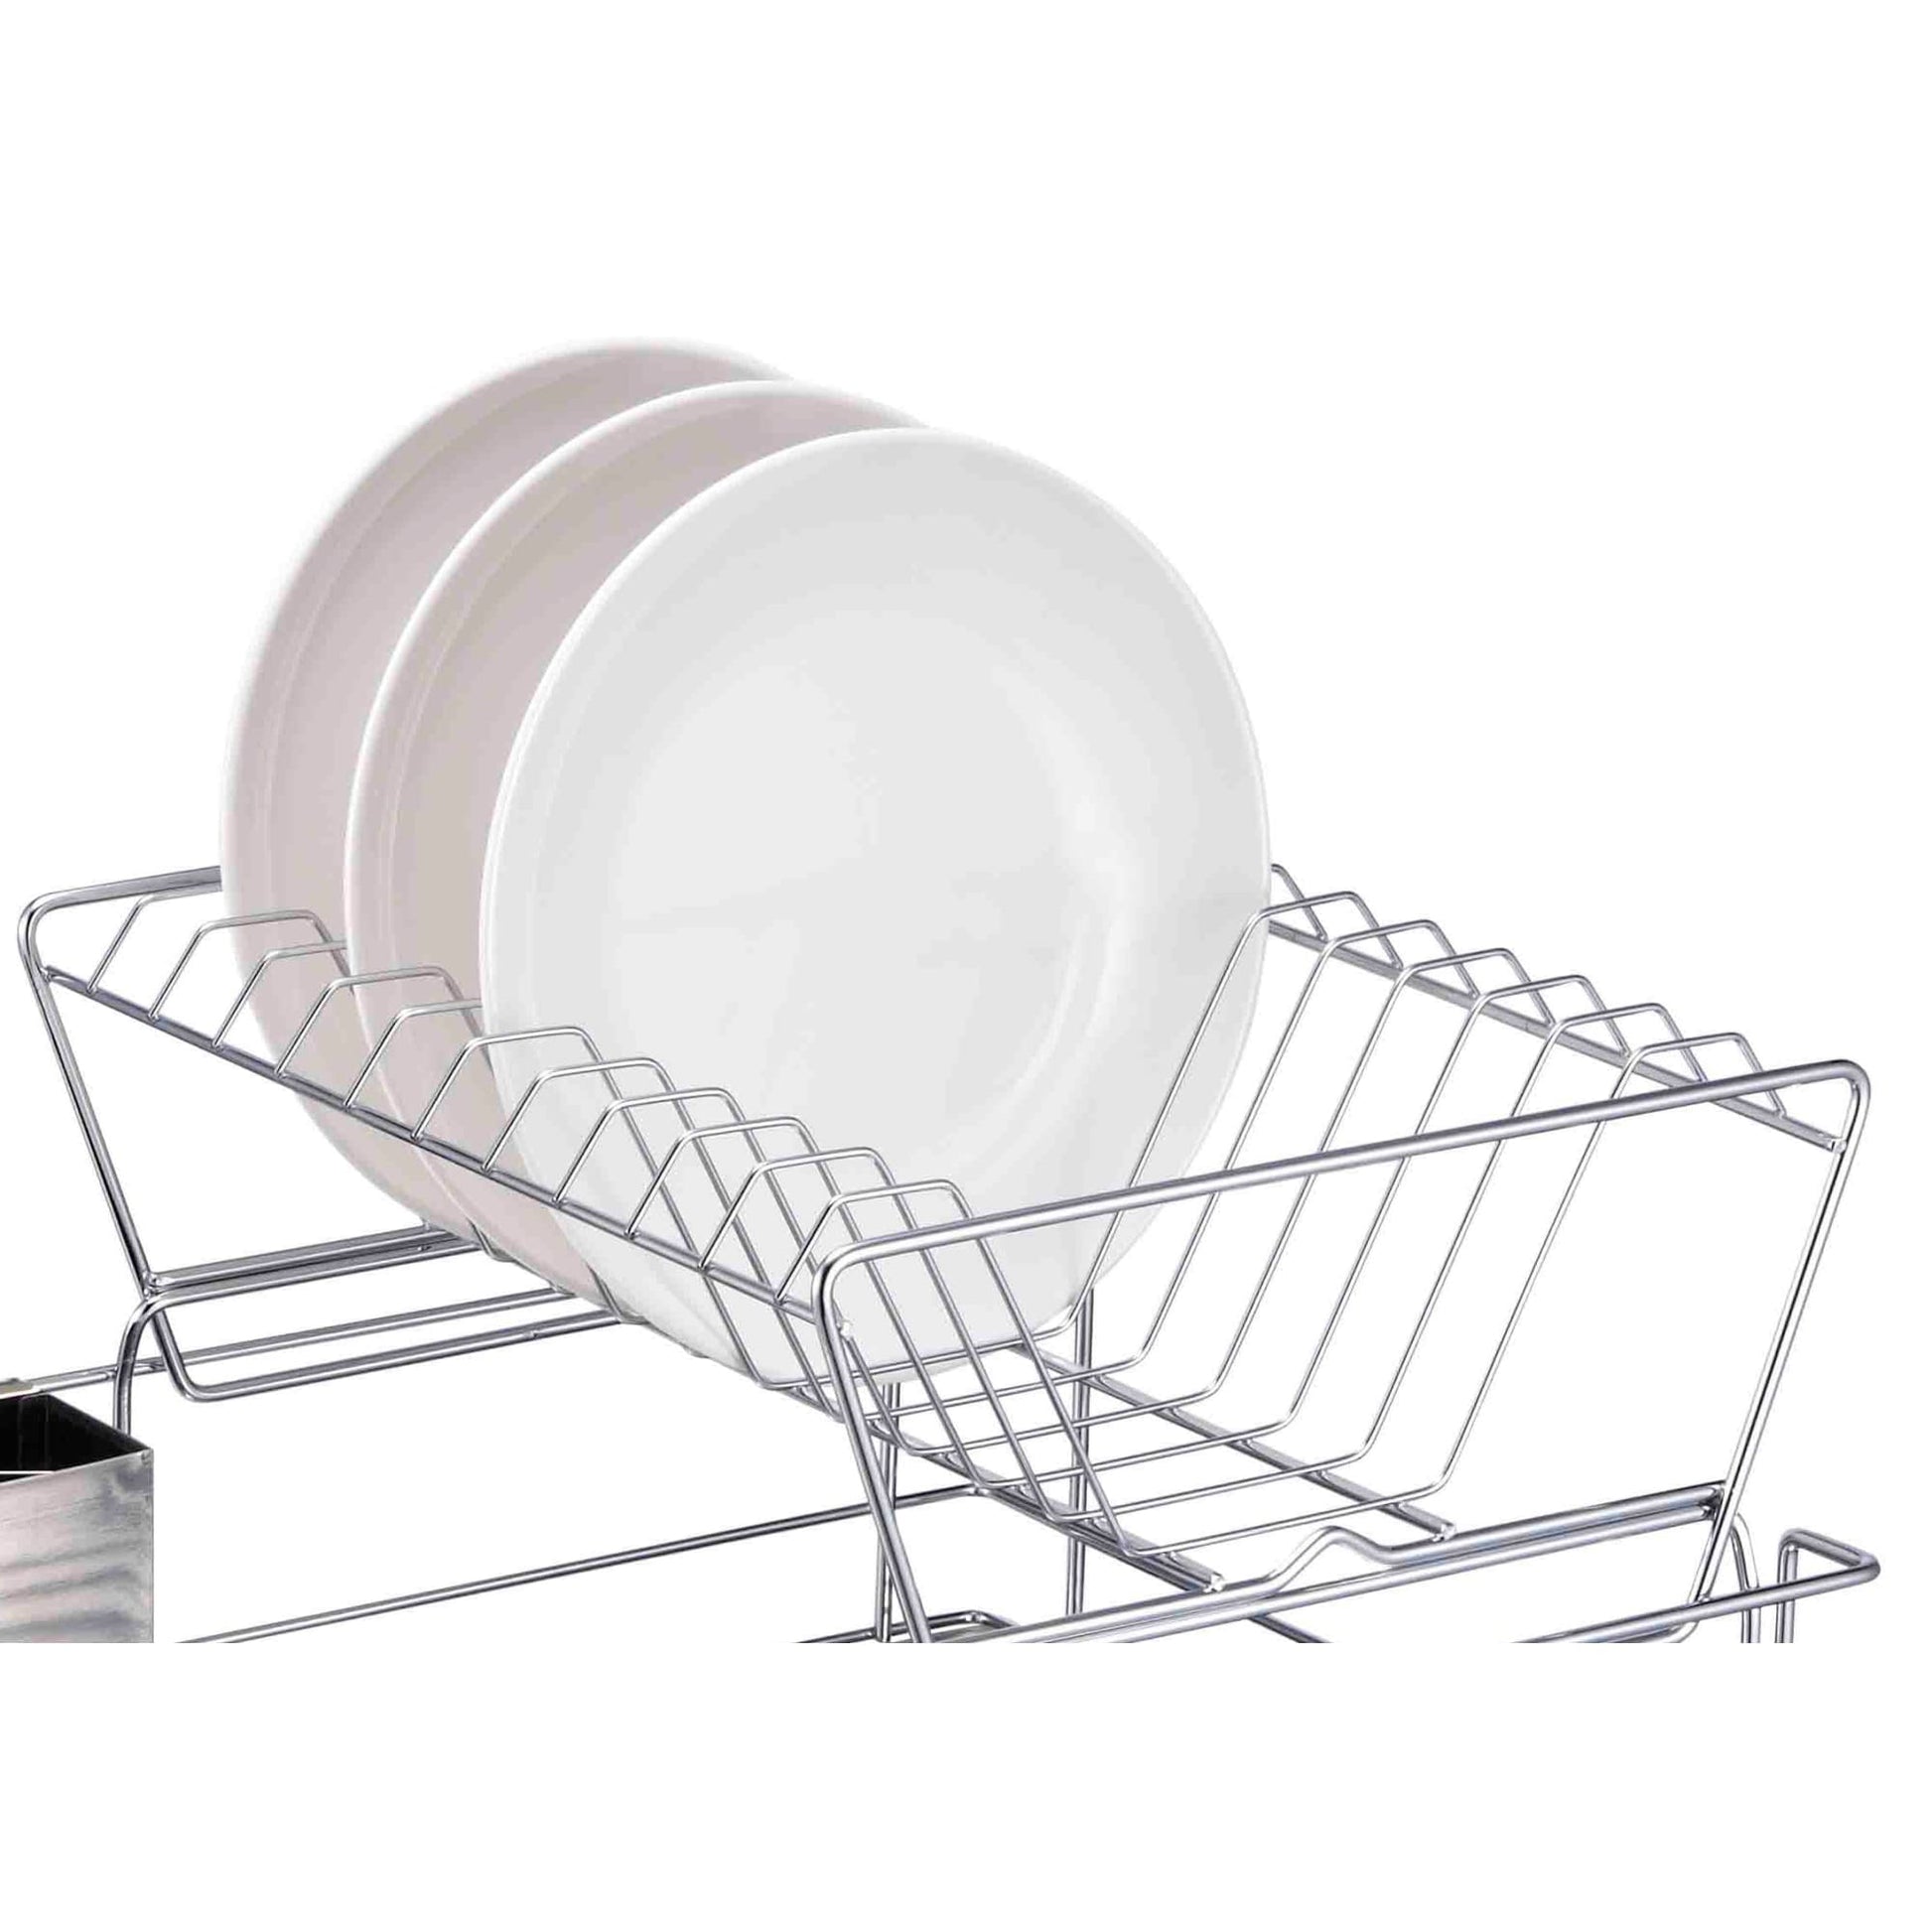 Home Basics 2-Tier Plastic Dish Drainer, Red, 22x11x13.5 Inches